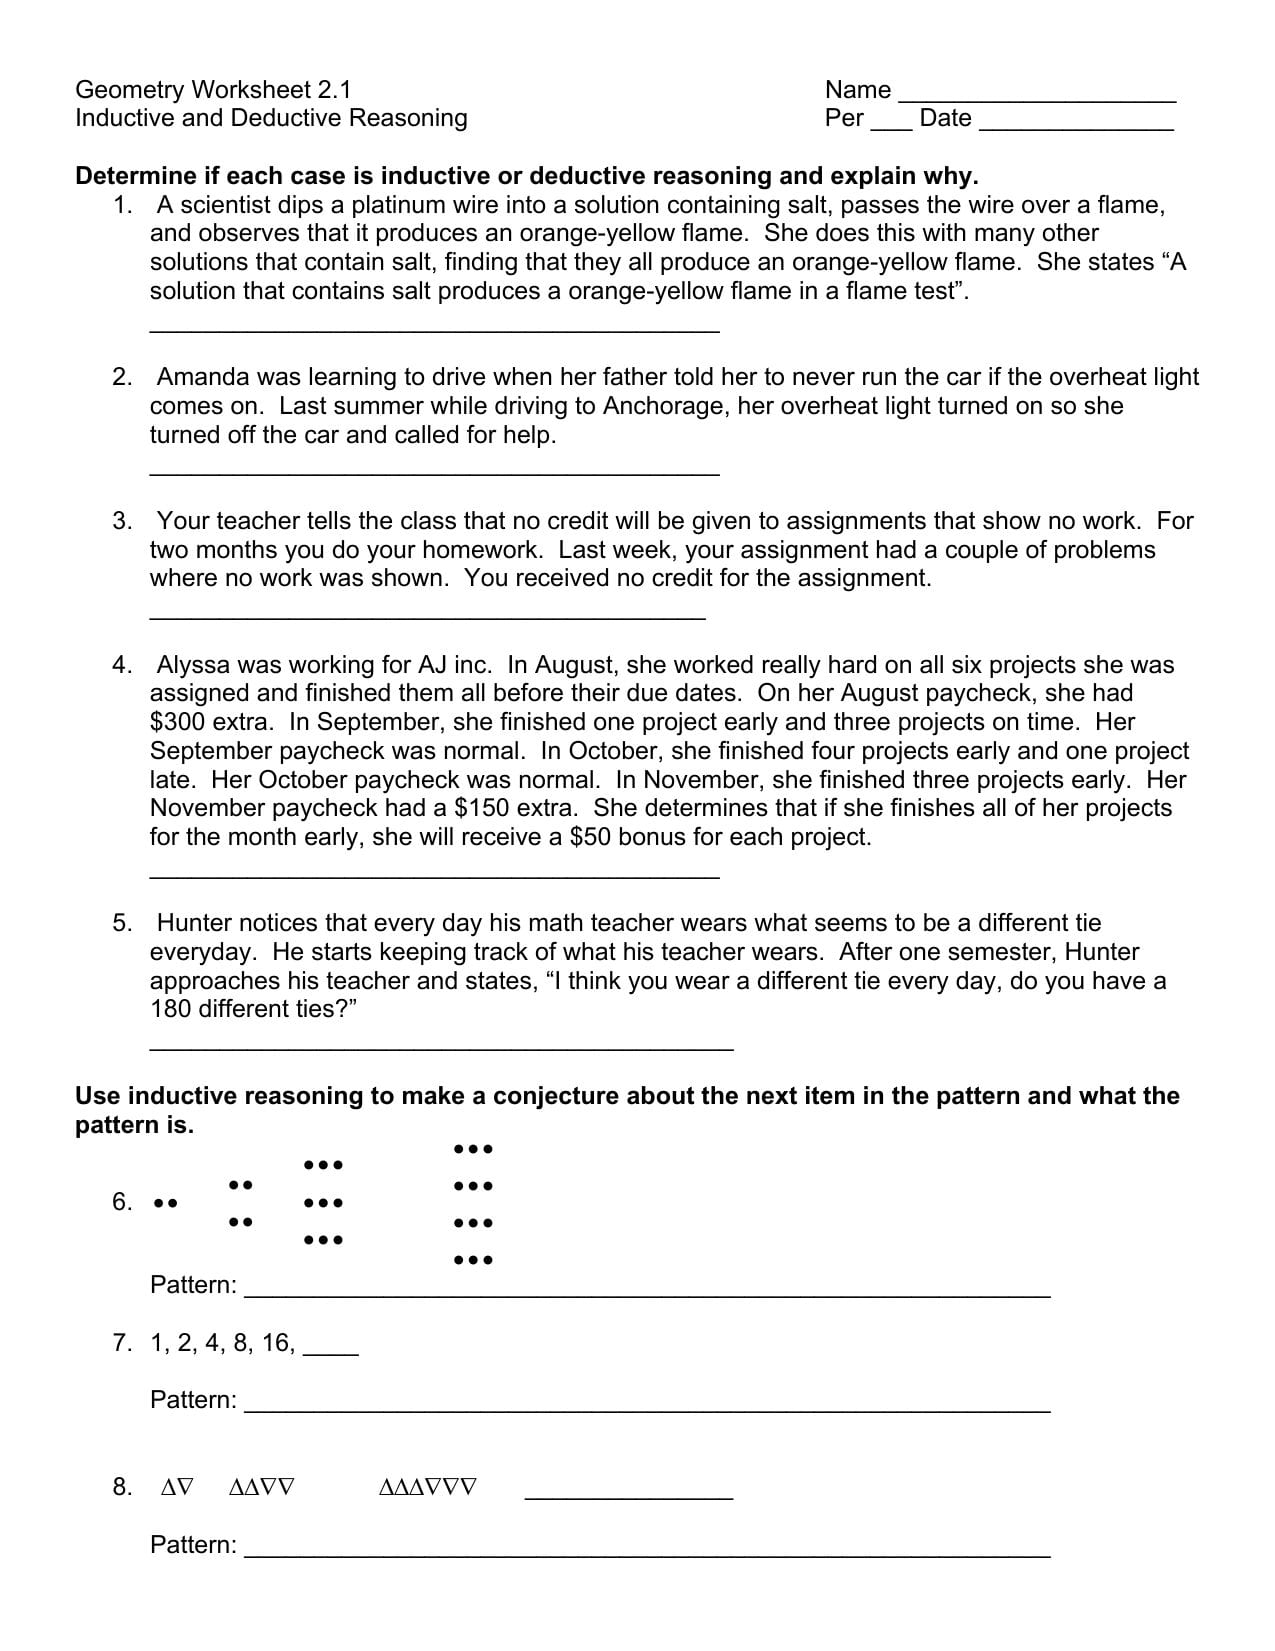 geometry-worksheet-21-name-inductive-and-deductive-reasoning-db-excel